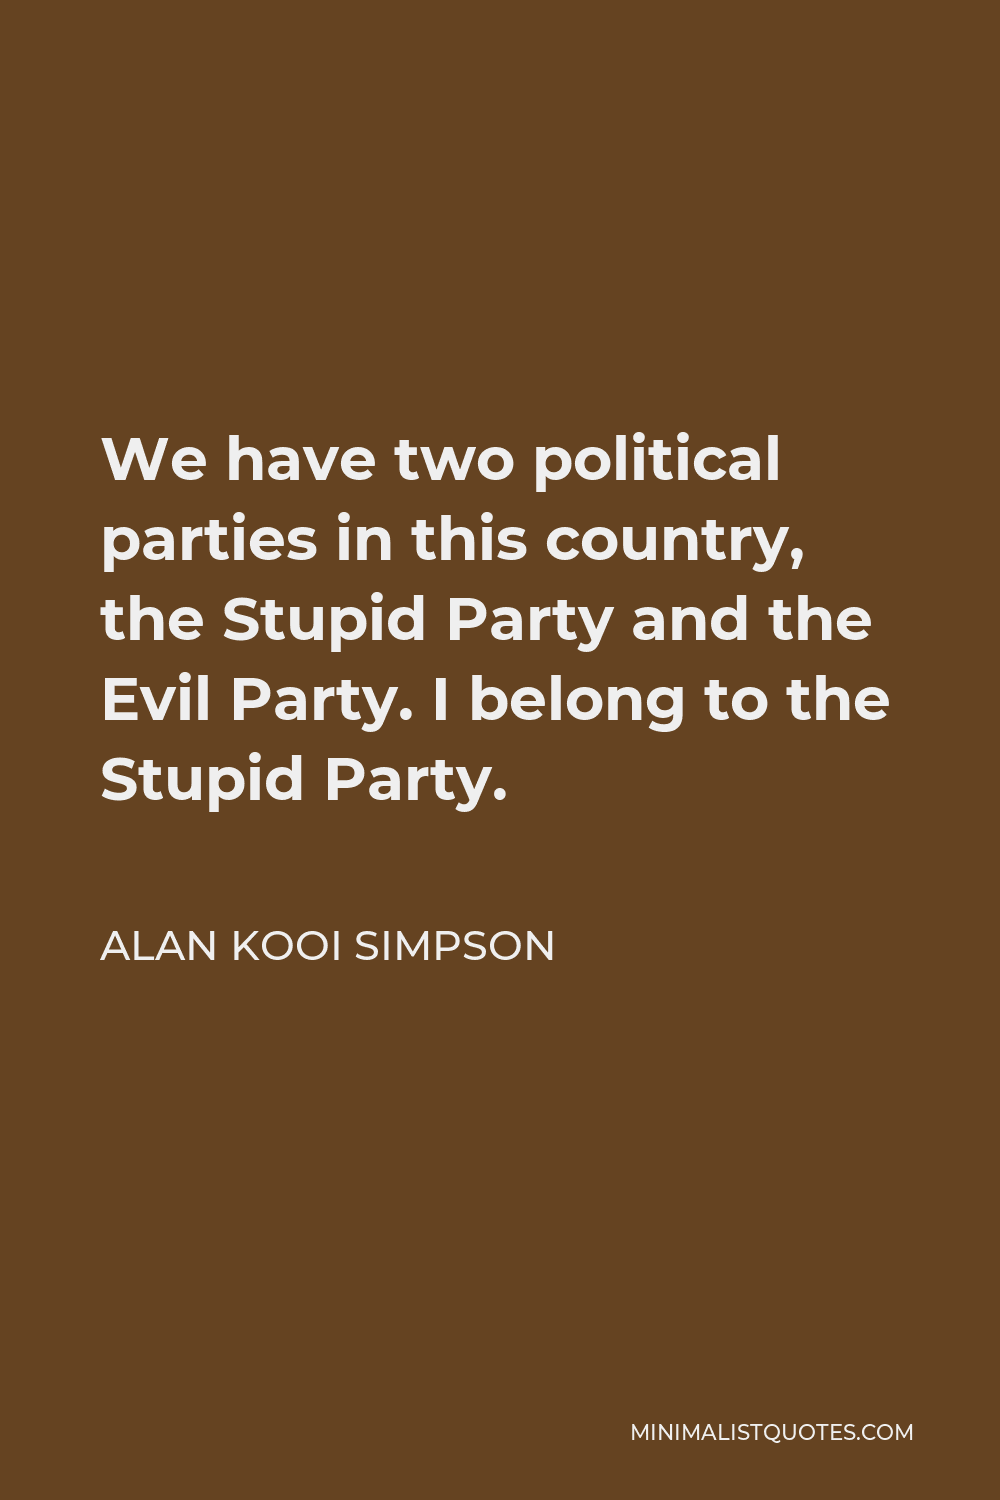 Alan Kooi Simpson Quote - We have two political parties in this country, the Stupid Party and the Evil Party. I belong to the Stupid Party.